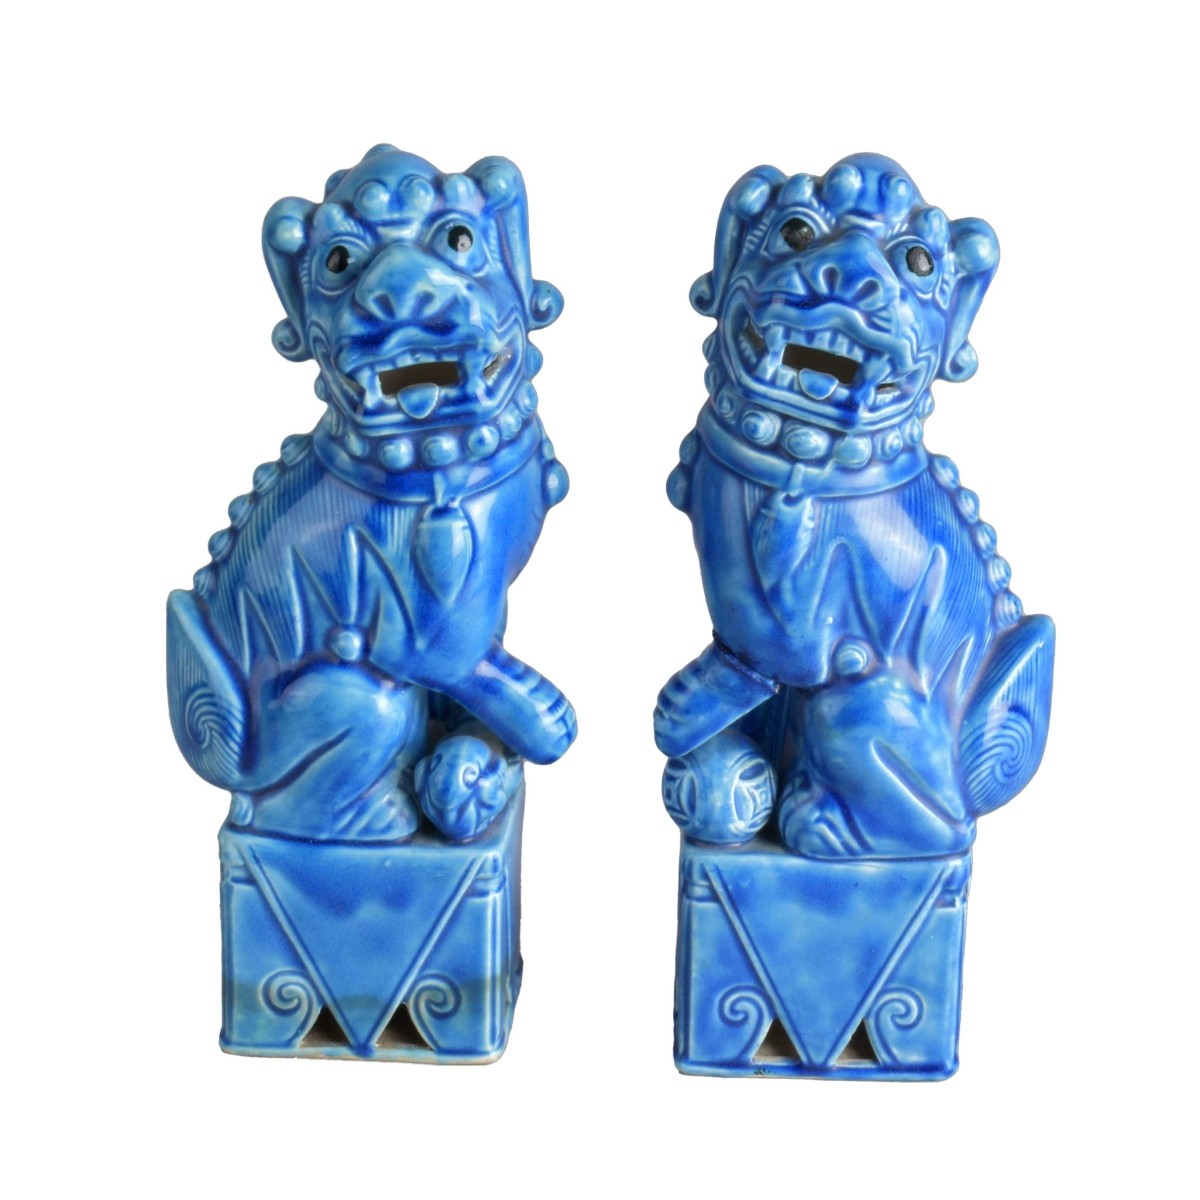 Pair of Chinese Foo Dogs